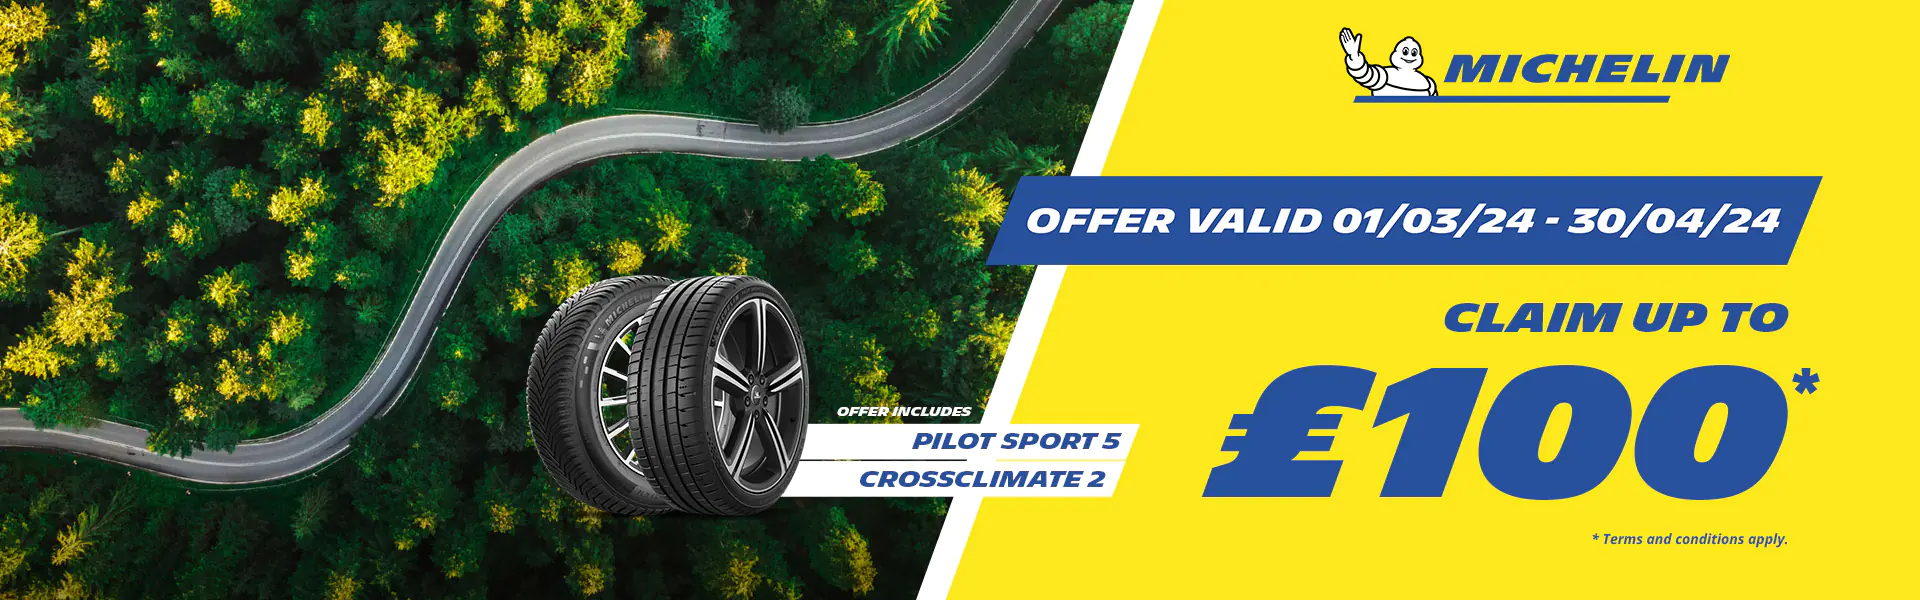 Claim up to £100 with Michelin and Bush Tyres